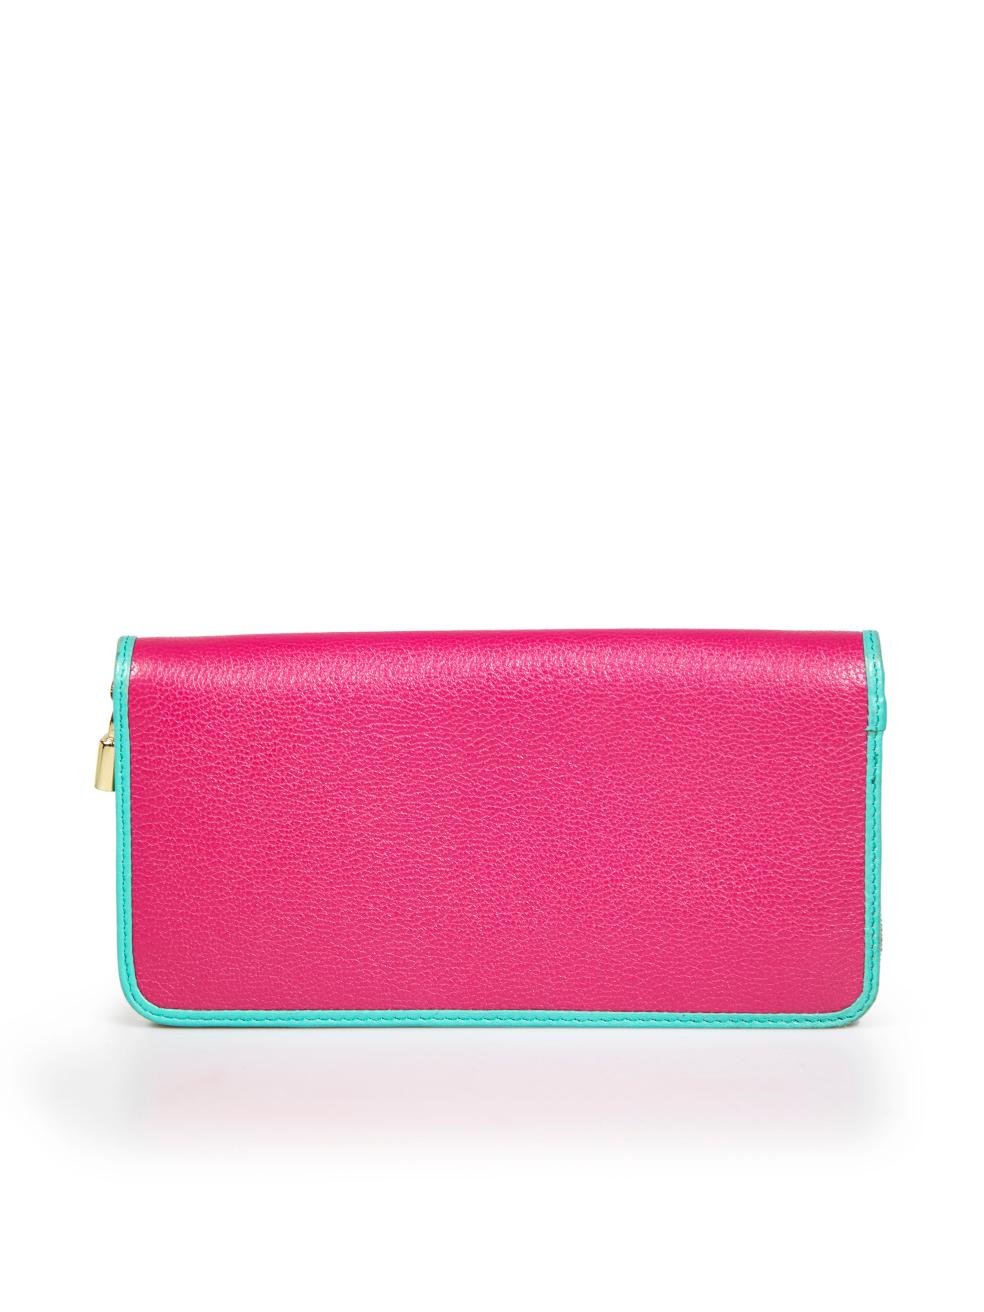 Loewe Pink Leather Contrast Trim Continental Wallet In Good Condition For Sale In London, GB